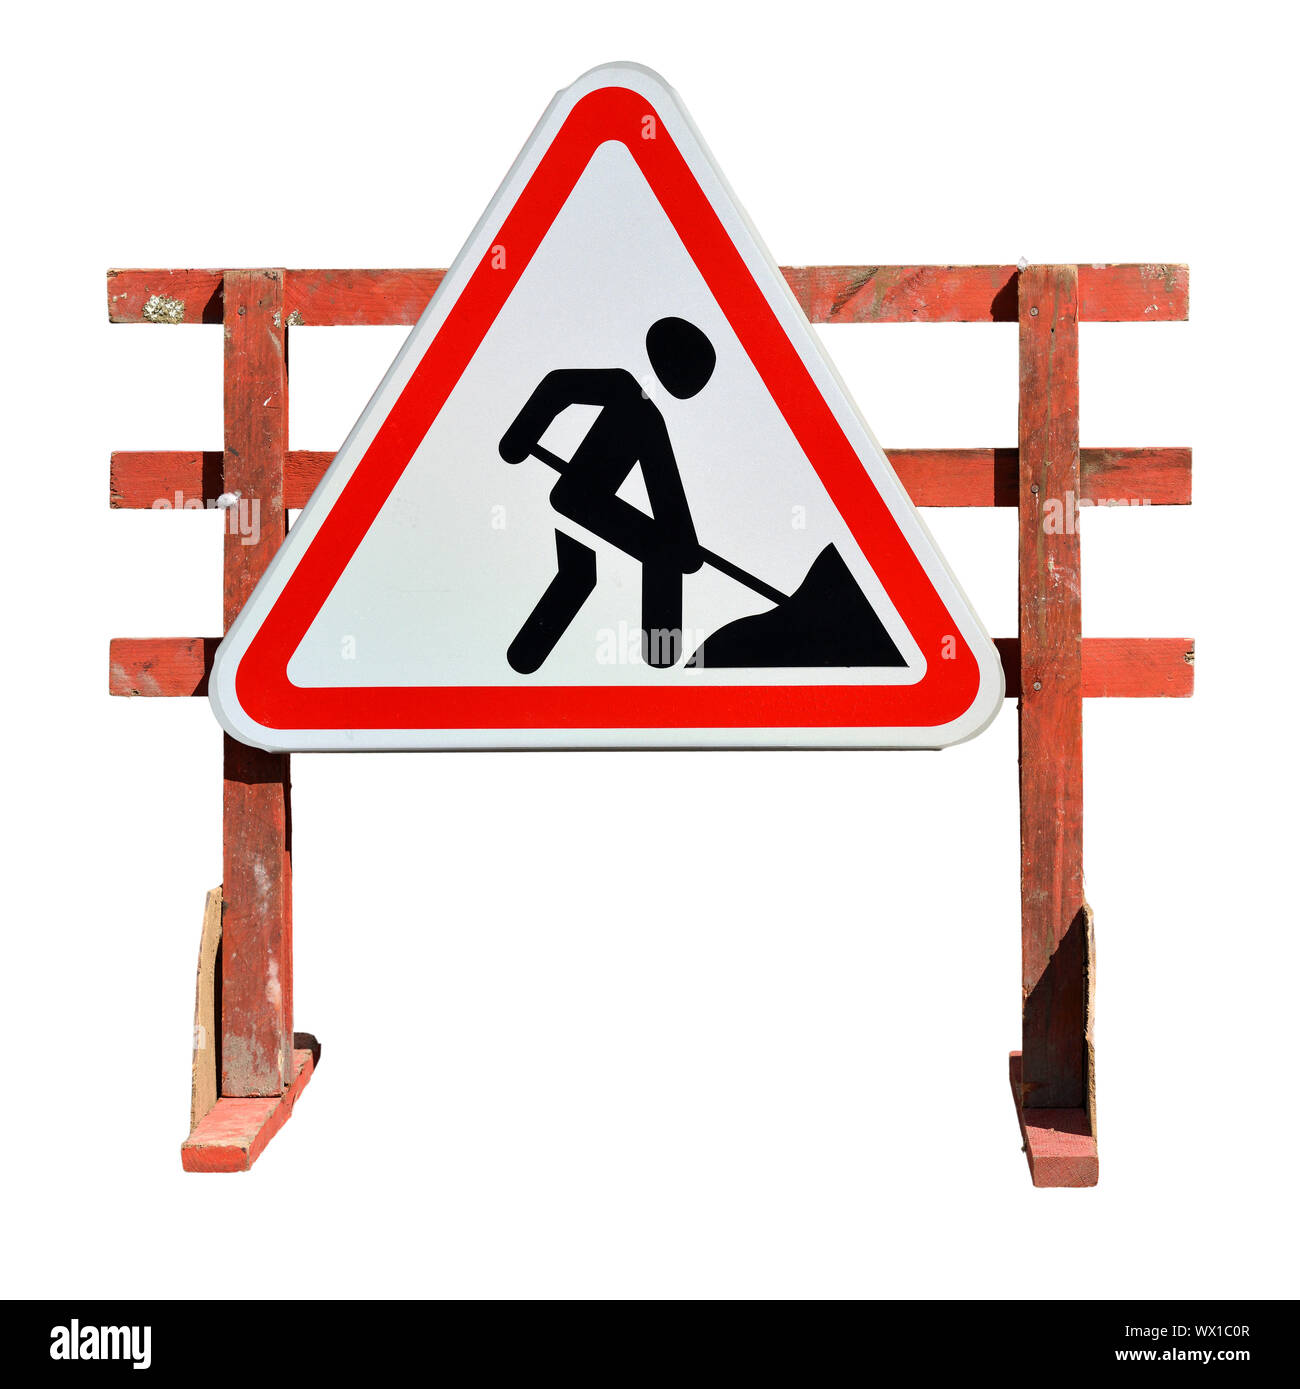 Work in progress. Roadworks, road signs. Men at work. Against white background. Stock Photo